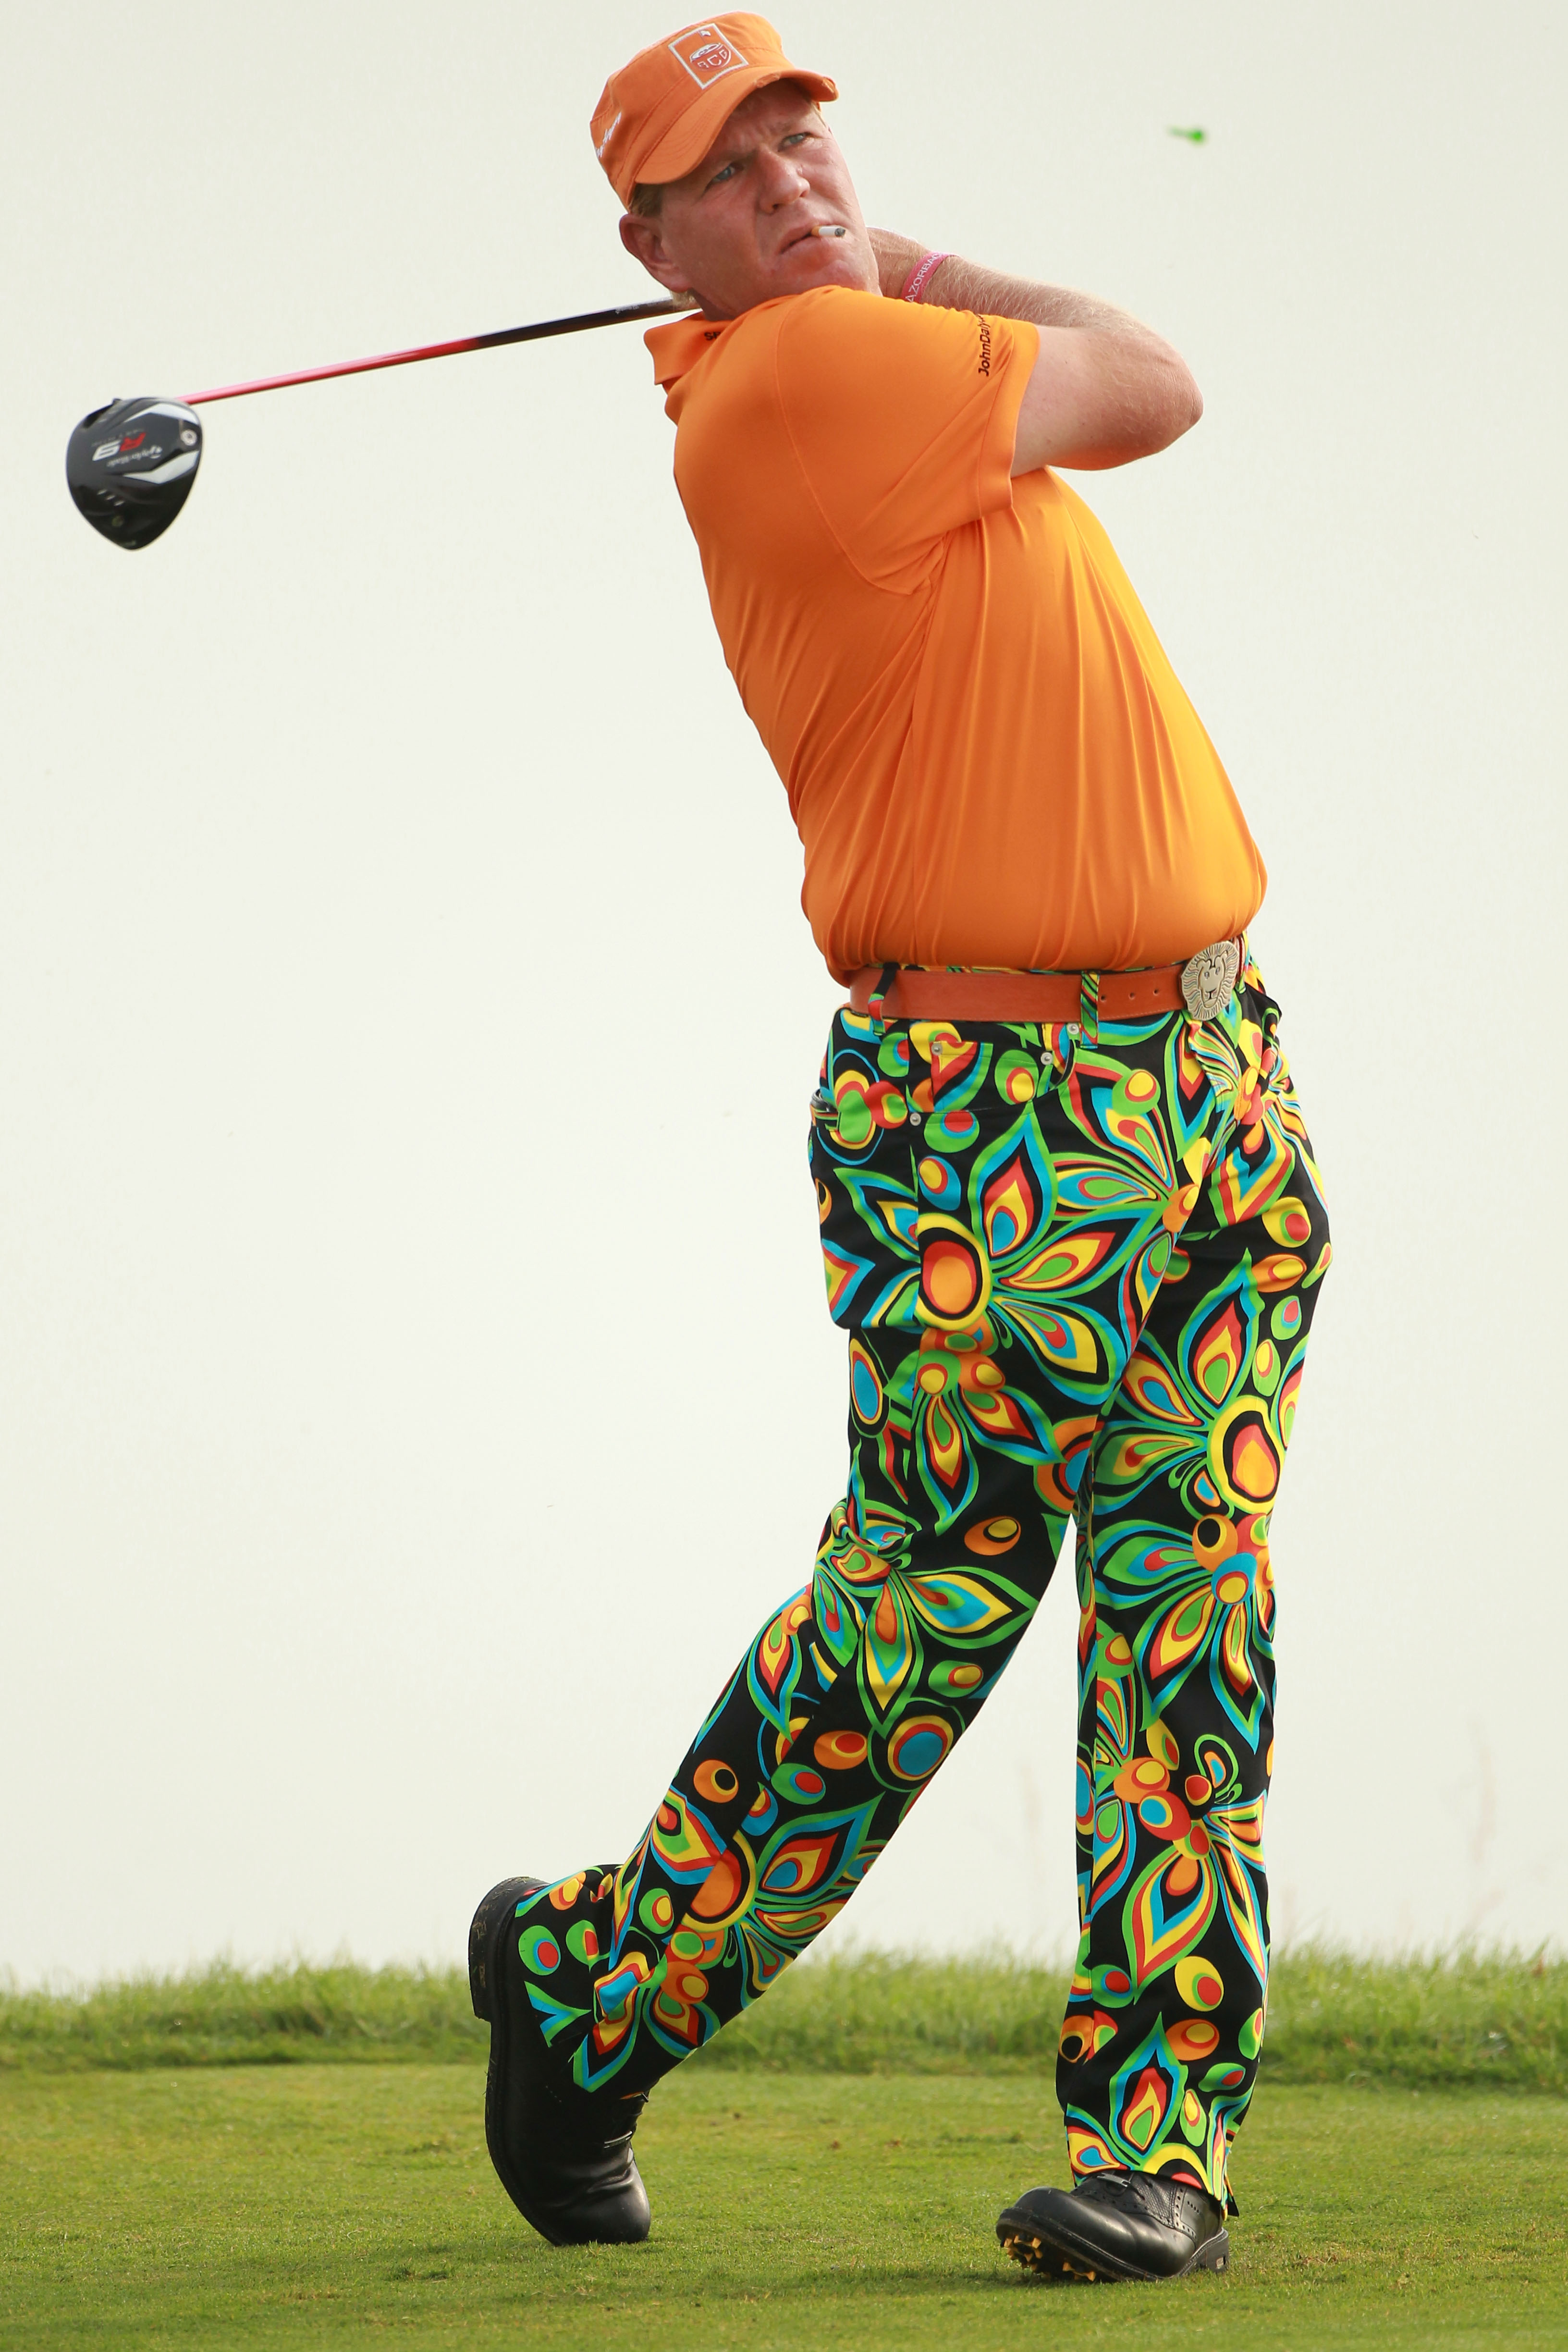 KOHLER, WI - AUGUST 10:  John Daly hits a tee shot during a practice round prior to the start of the 92nd PGA Championship on the Straits Course at Whistling Straits on August 10, 2010 in Kohler, Wisconsin.  (Photo by Andrew Redington/Getty Images)